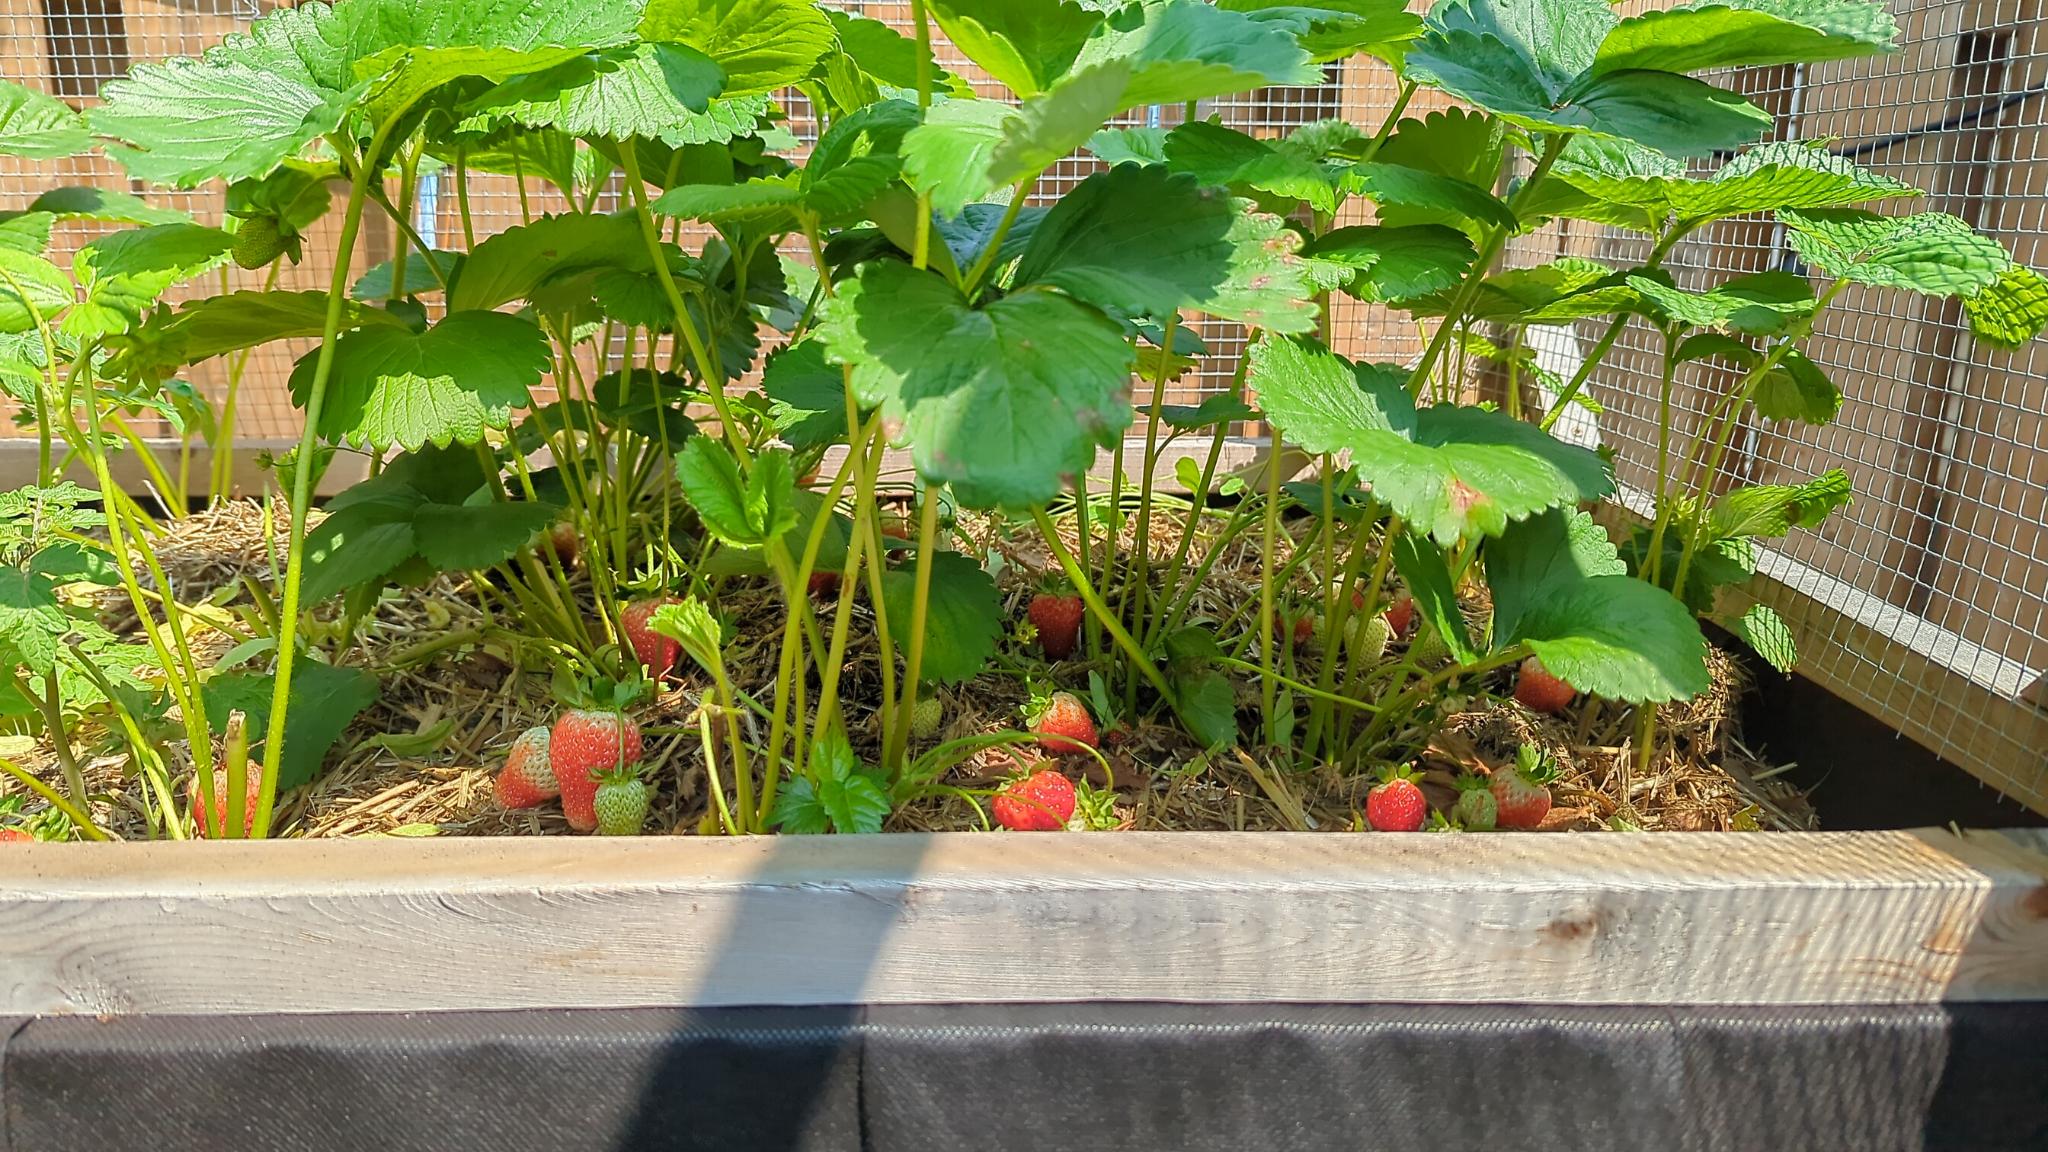 strawberry plants with many ripening berries!